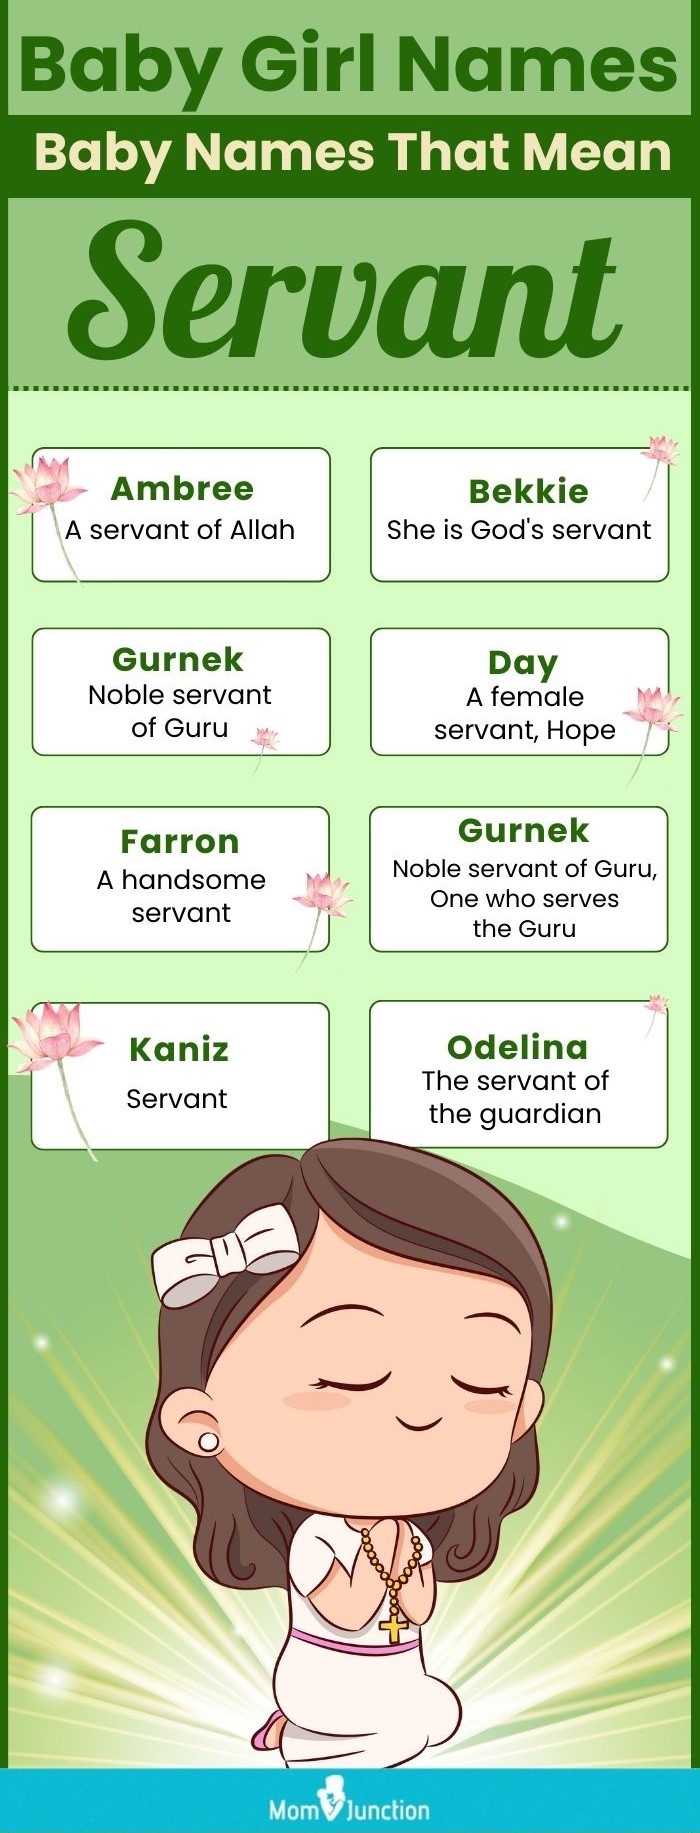 baby girl names that mean servant (infographic)